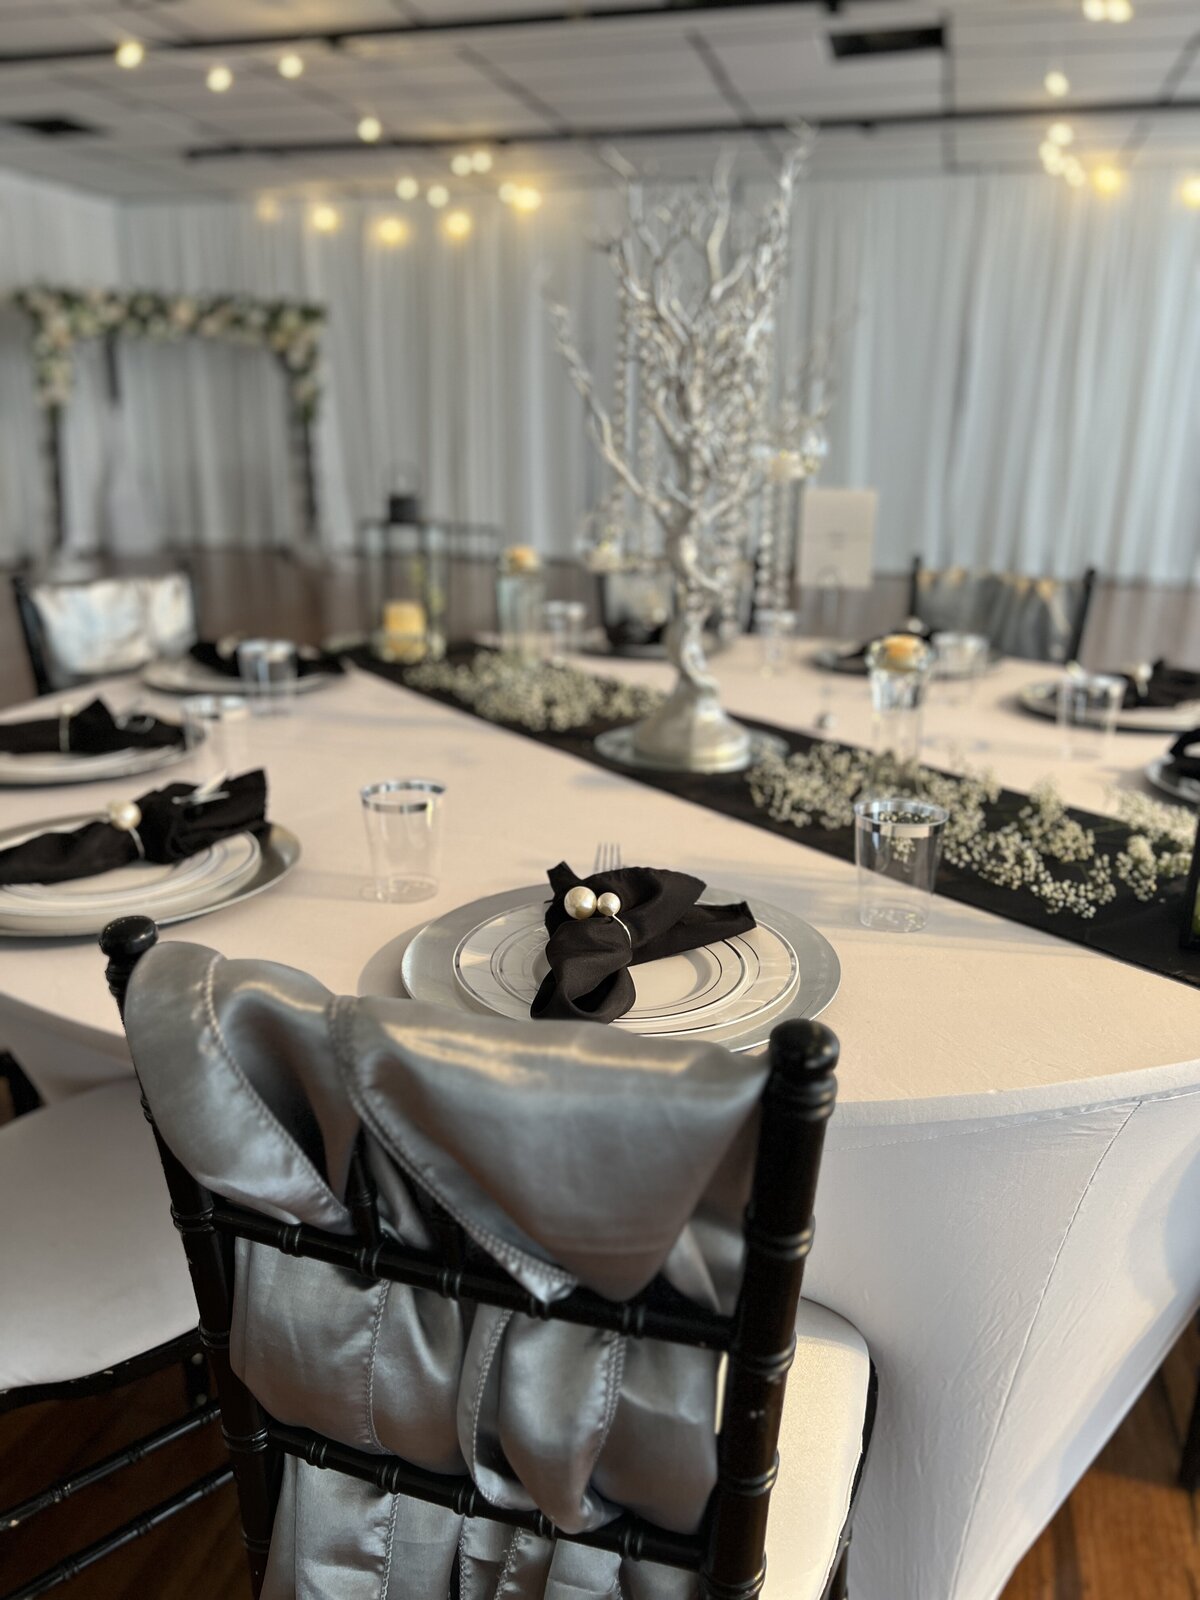 Timeless and Elegant Wedding Guest Table Decor Package - Inclusive Setup with Classic Charm for Unforgettable Celebrations